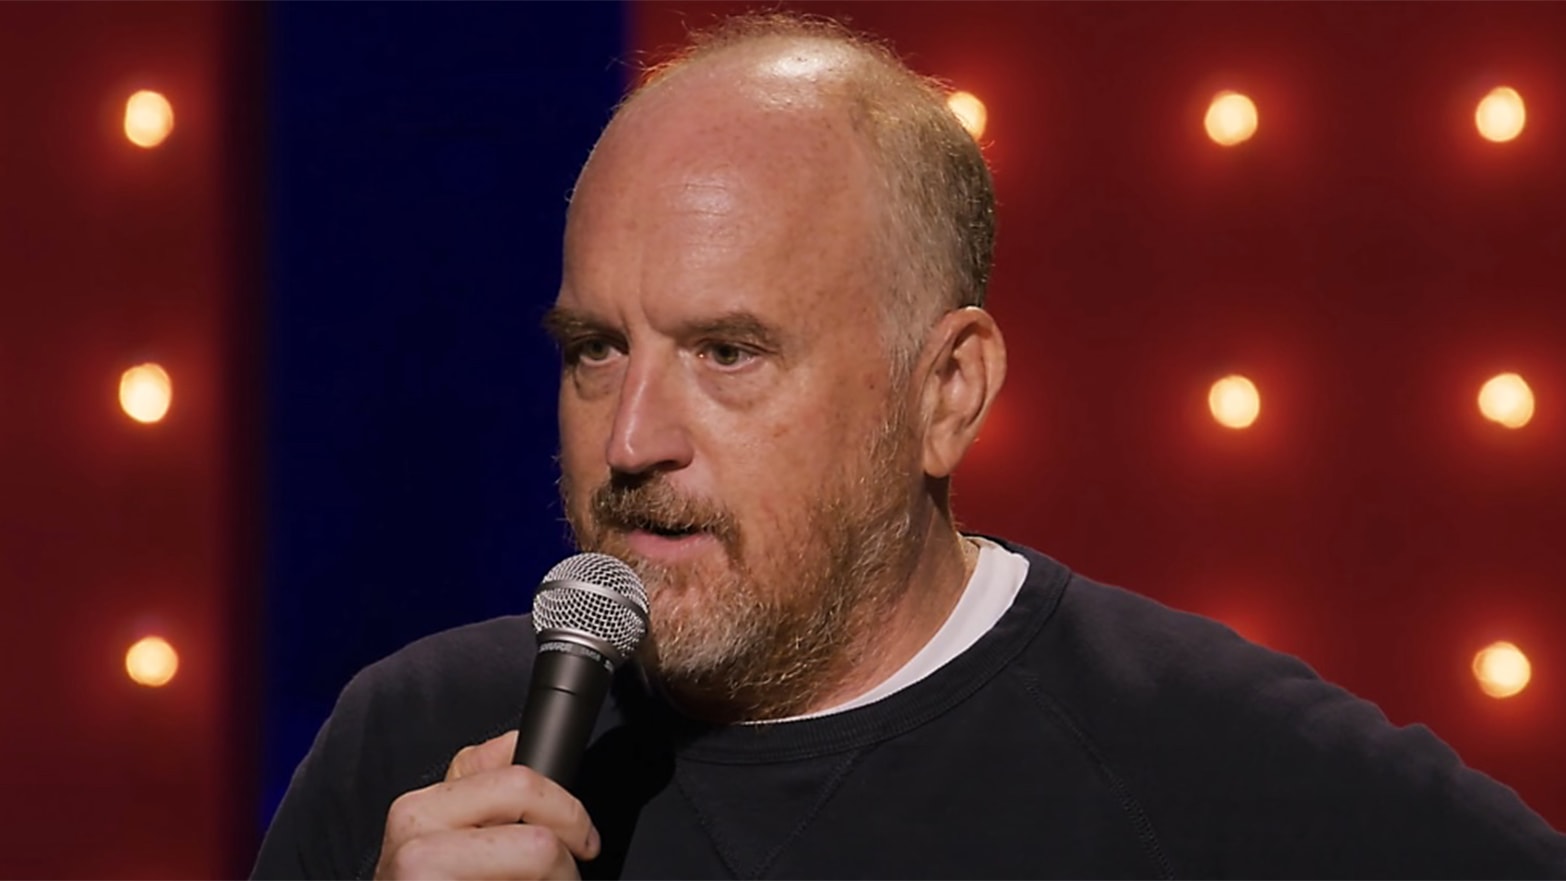 Louis CK - Hope there is no God #comedy #standup #standupcomedy